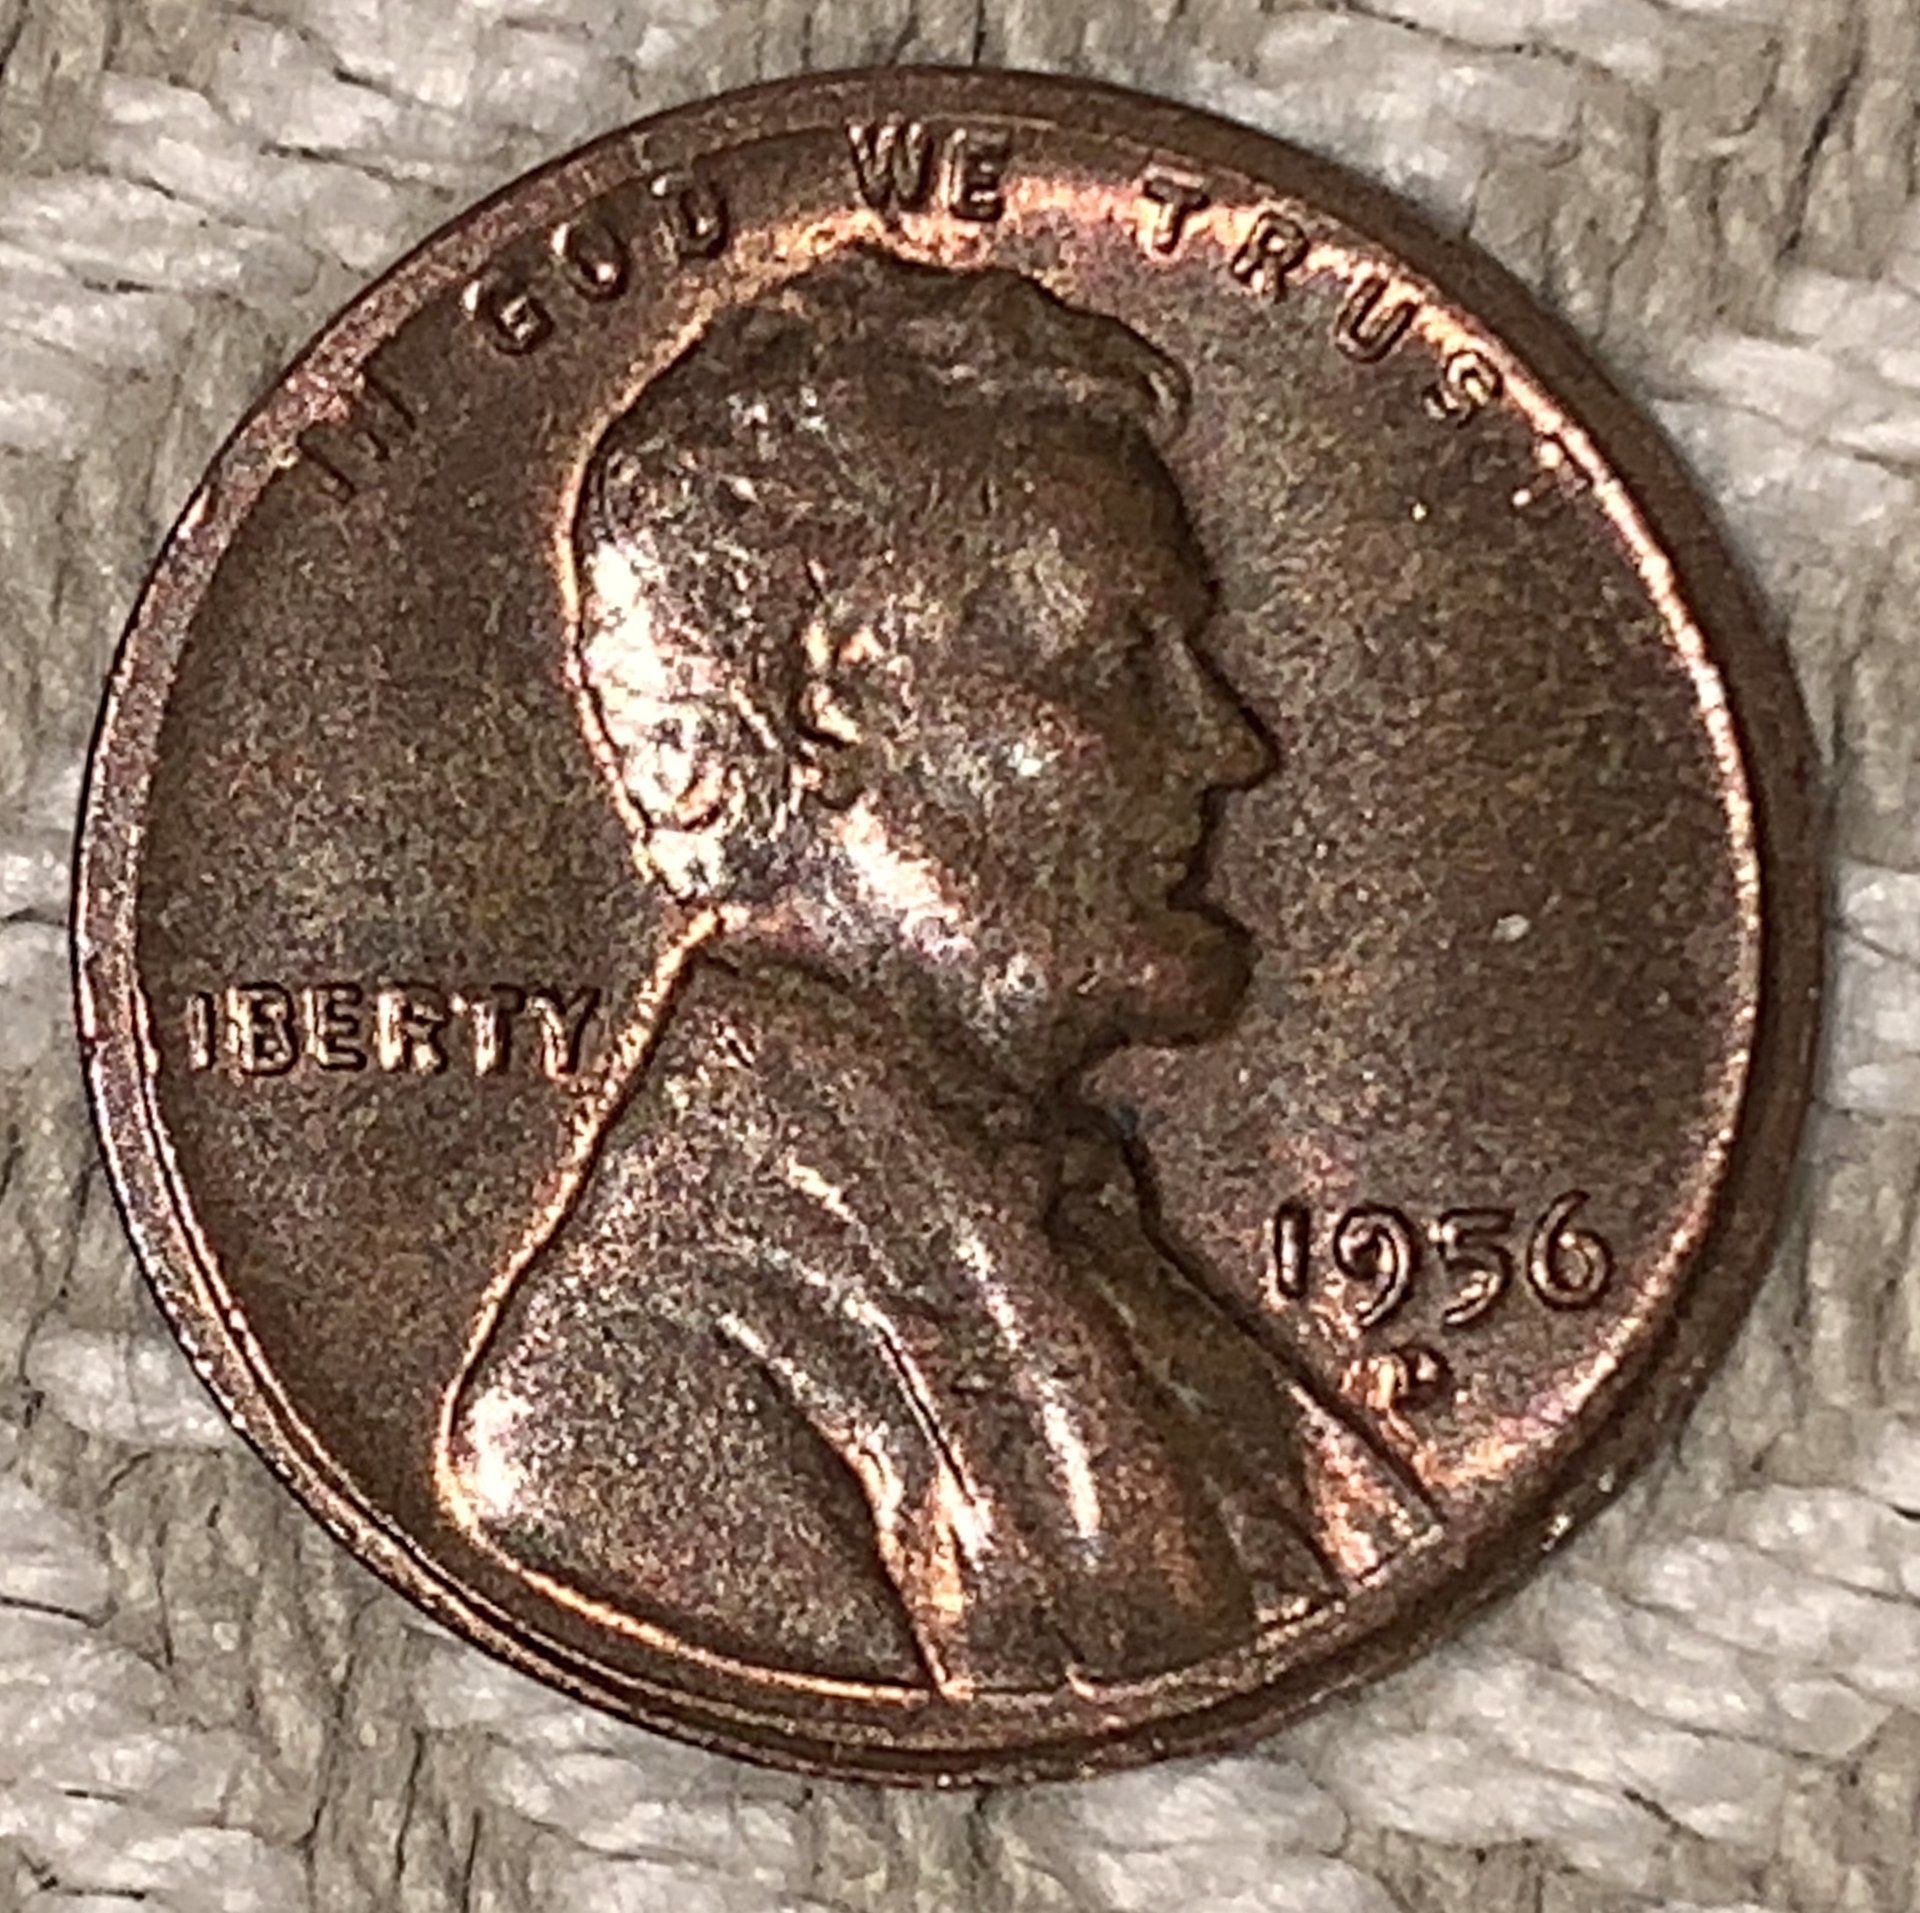 1956 D Wheat Penny Missing L In Liberty Coin Talk,Chicken Breast Calories Per Ounce